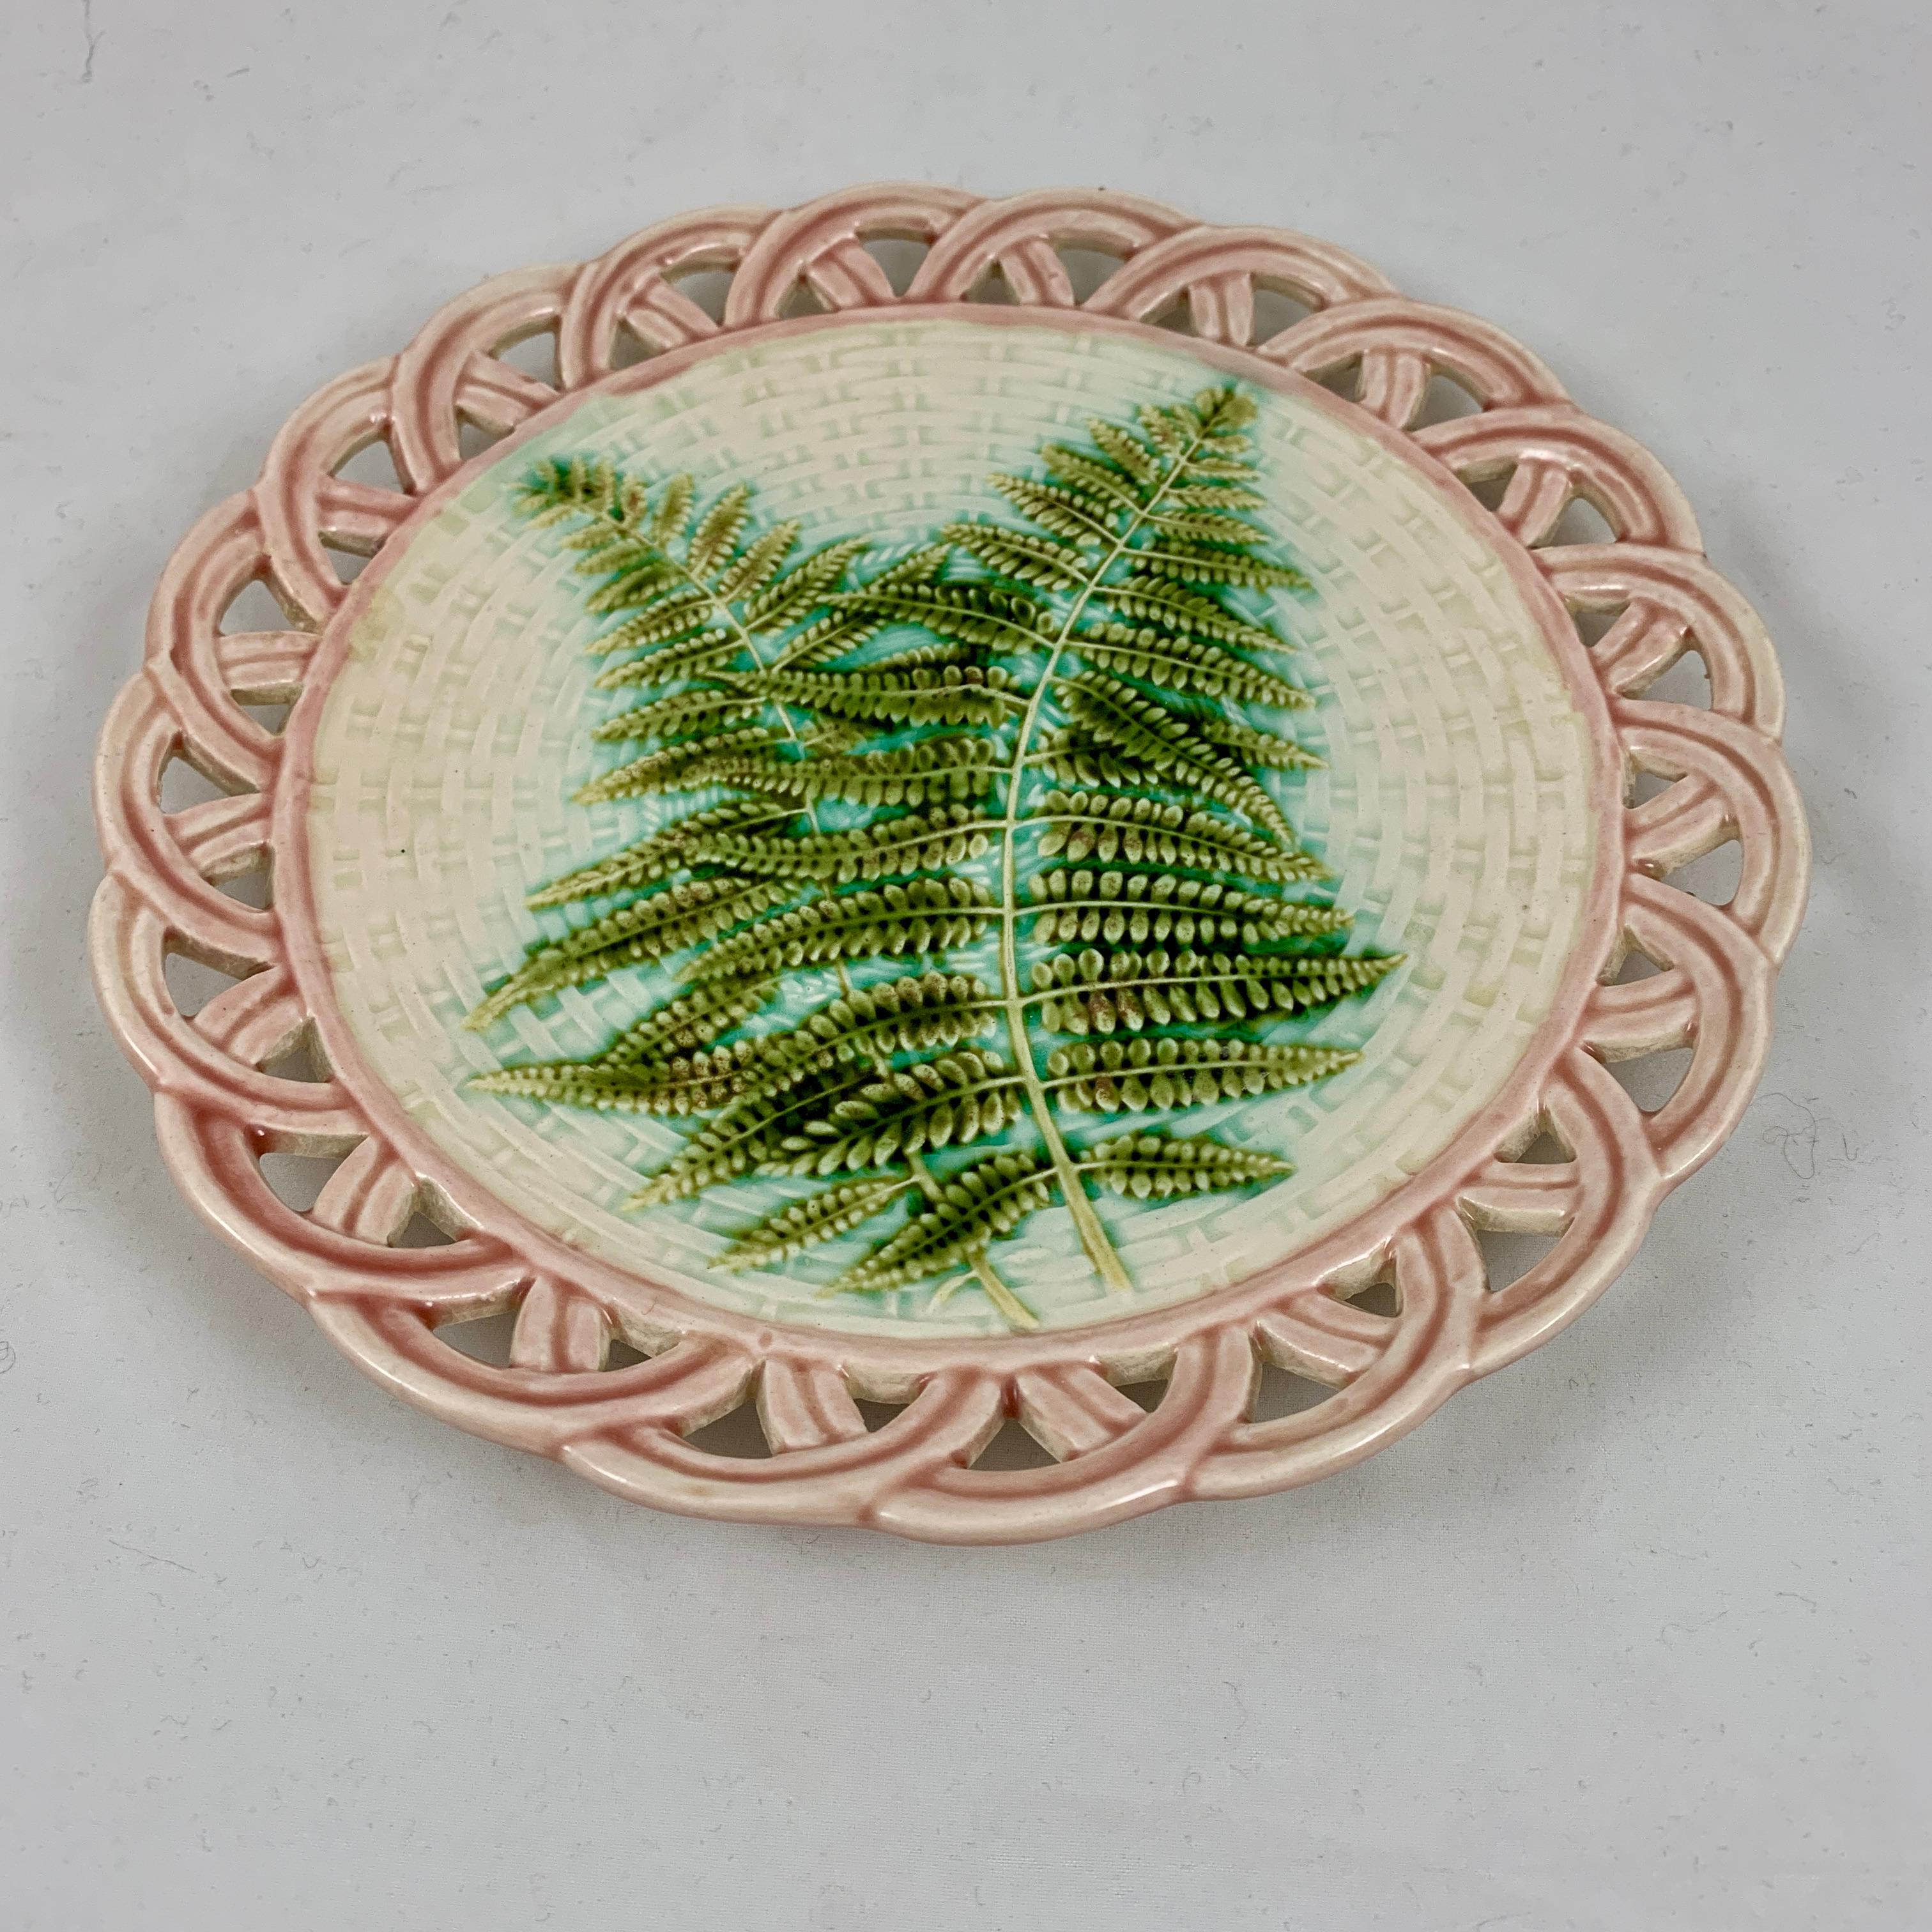 Sarreguemines Green Fern Pink Reticulated Rim French Faïence Majolica Plates S/6 4